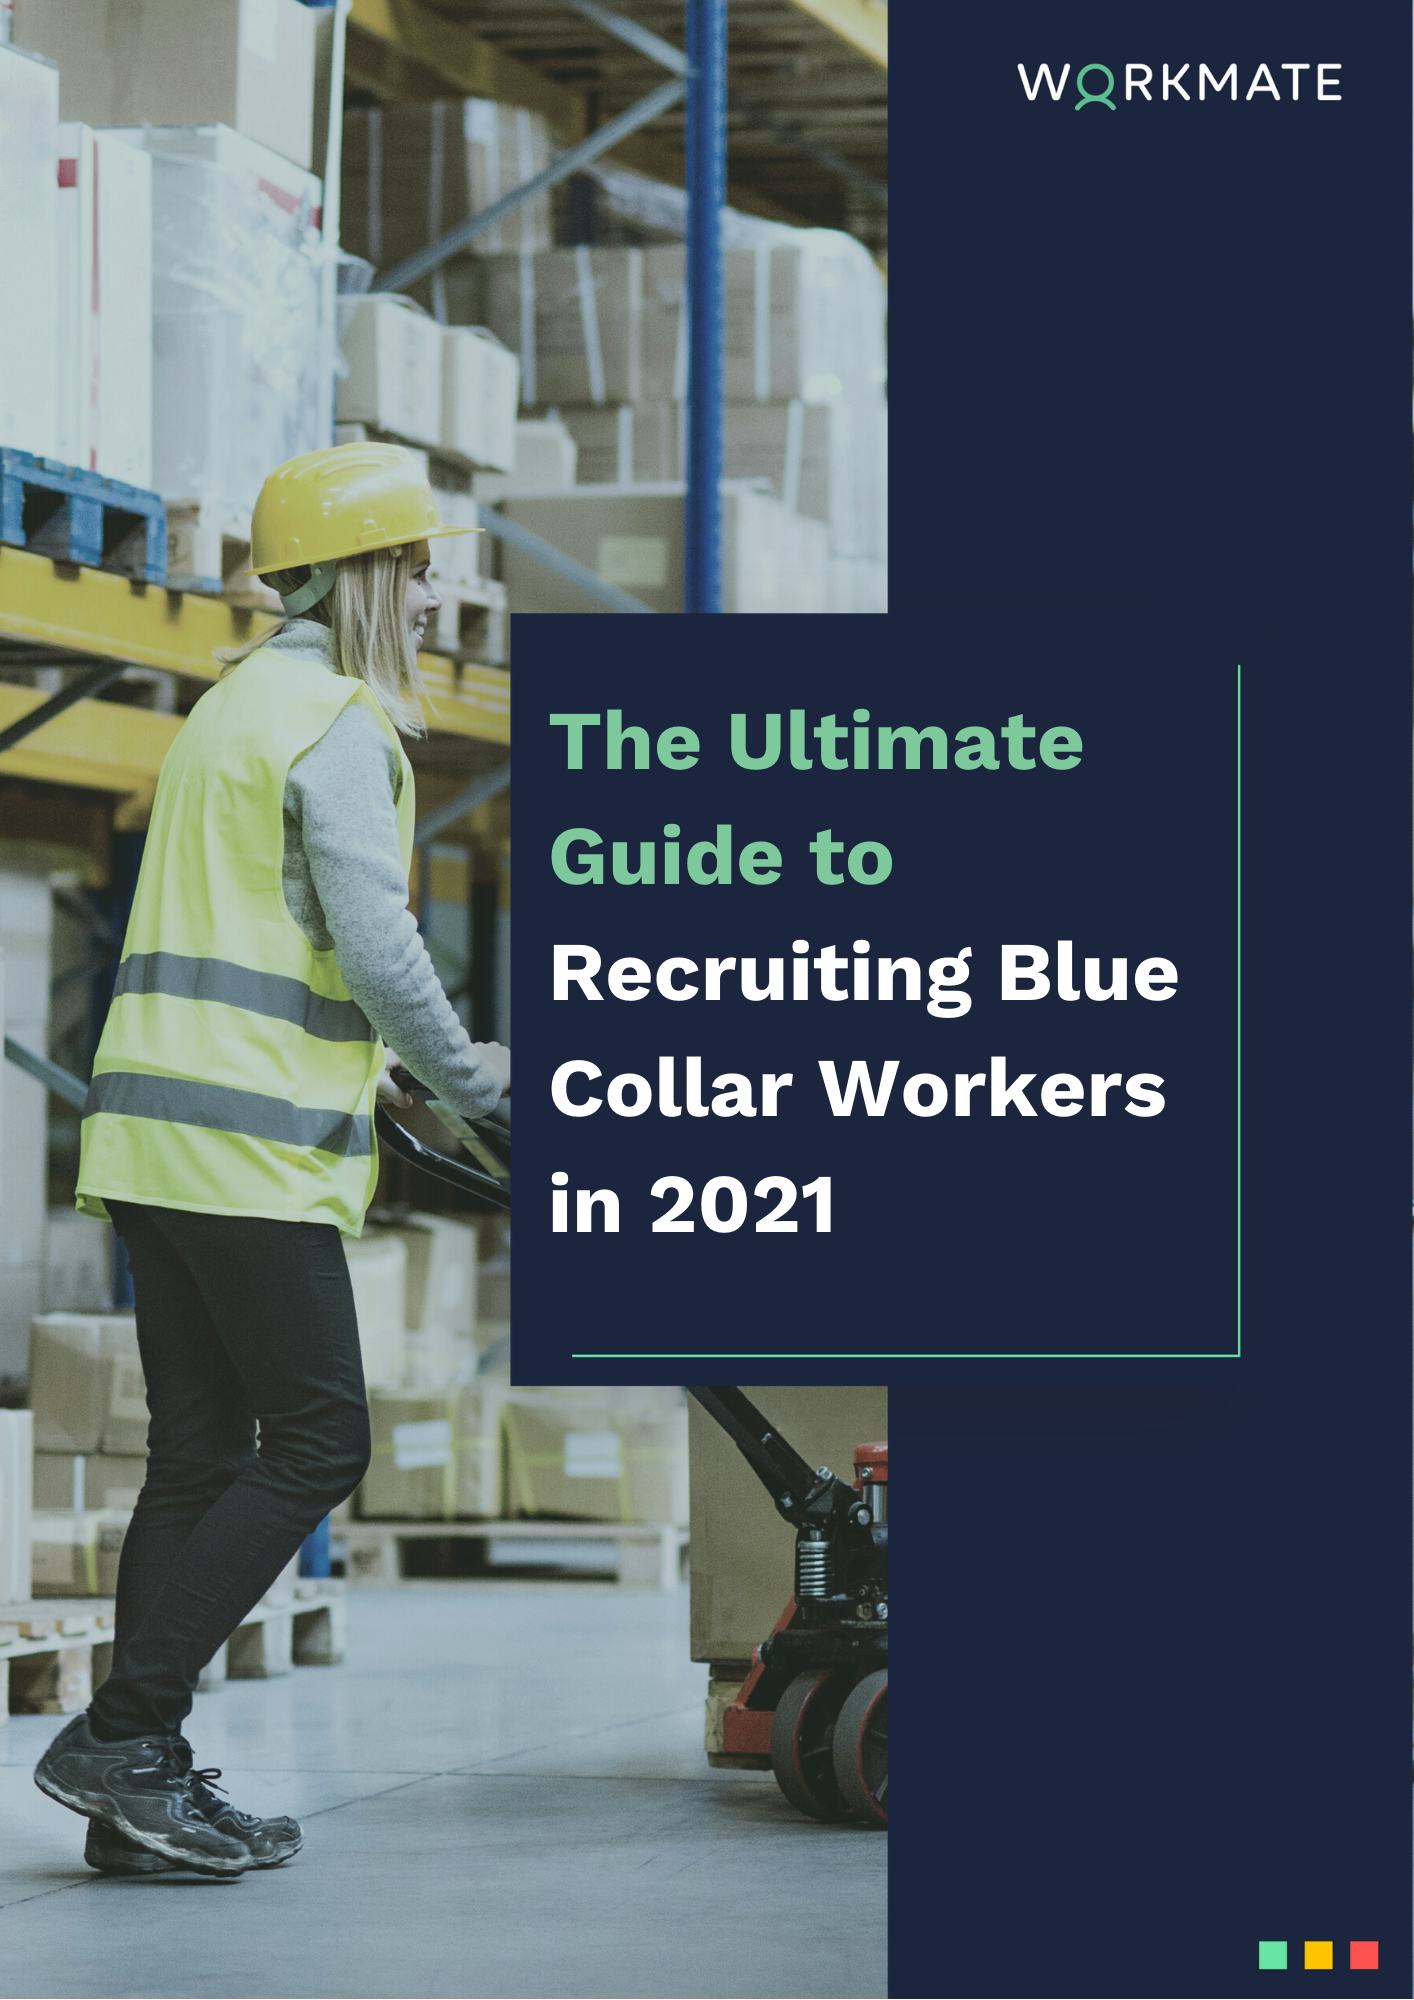 The Ultimate Guide to: Recruiting Blue Collar Workers